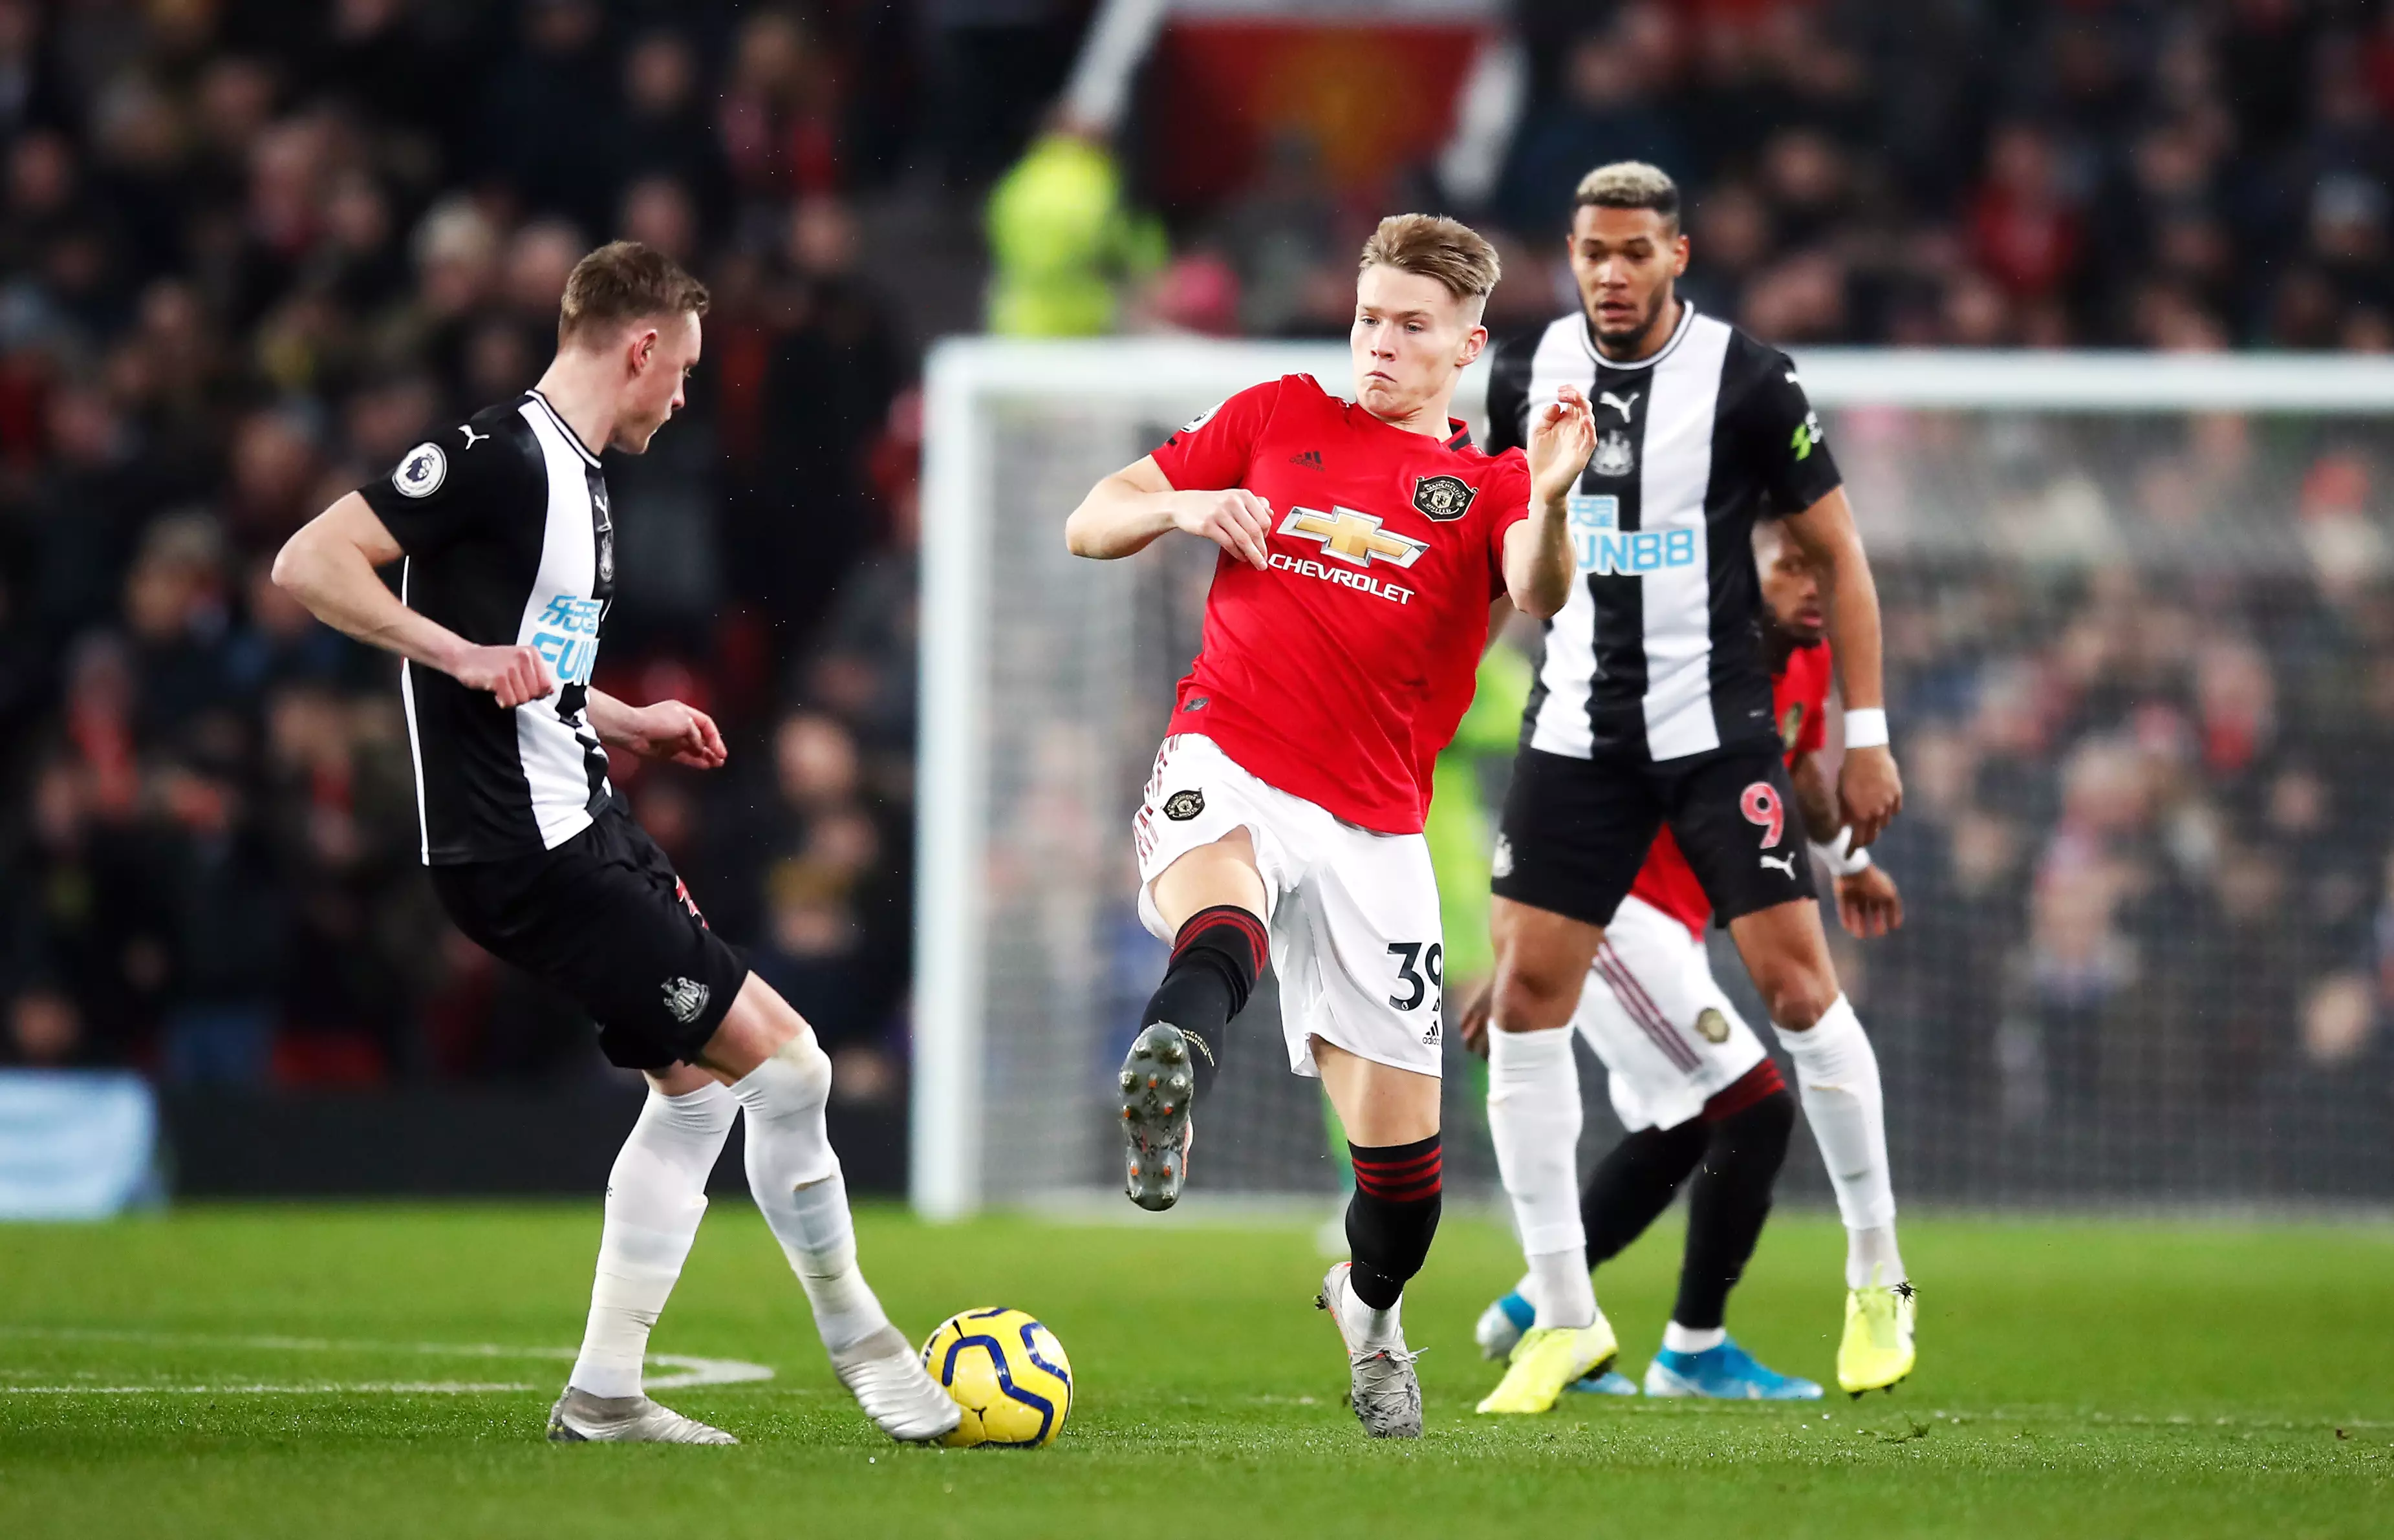 Scott McTominay lunged in with his studs showing very early on